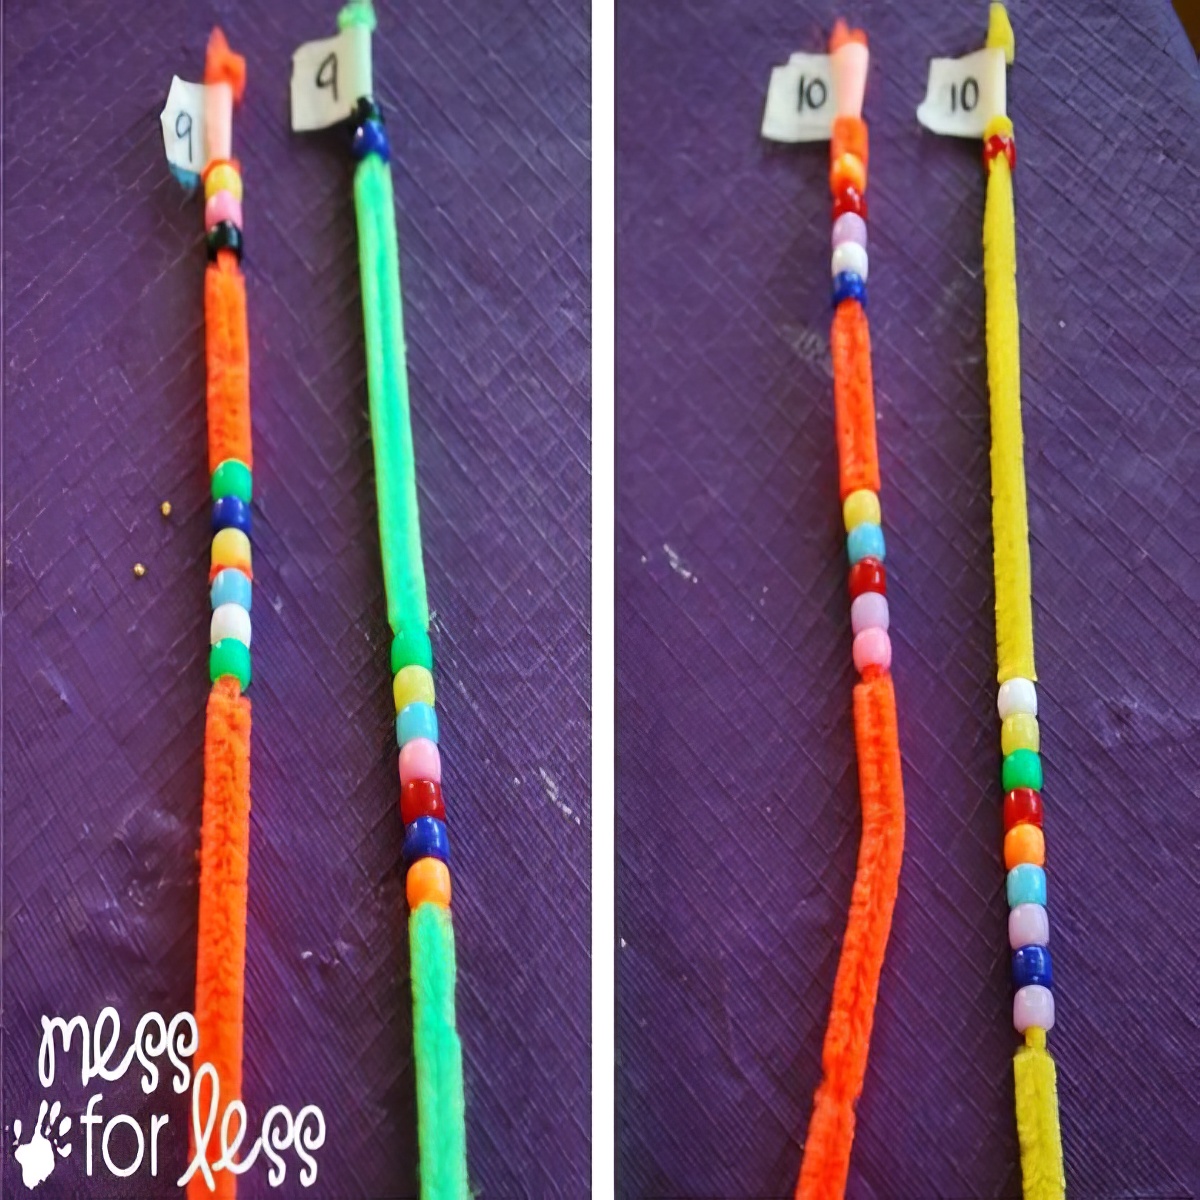 bead-math-game - learn how to count using beads and pipe cleaners